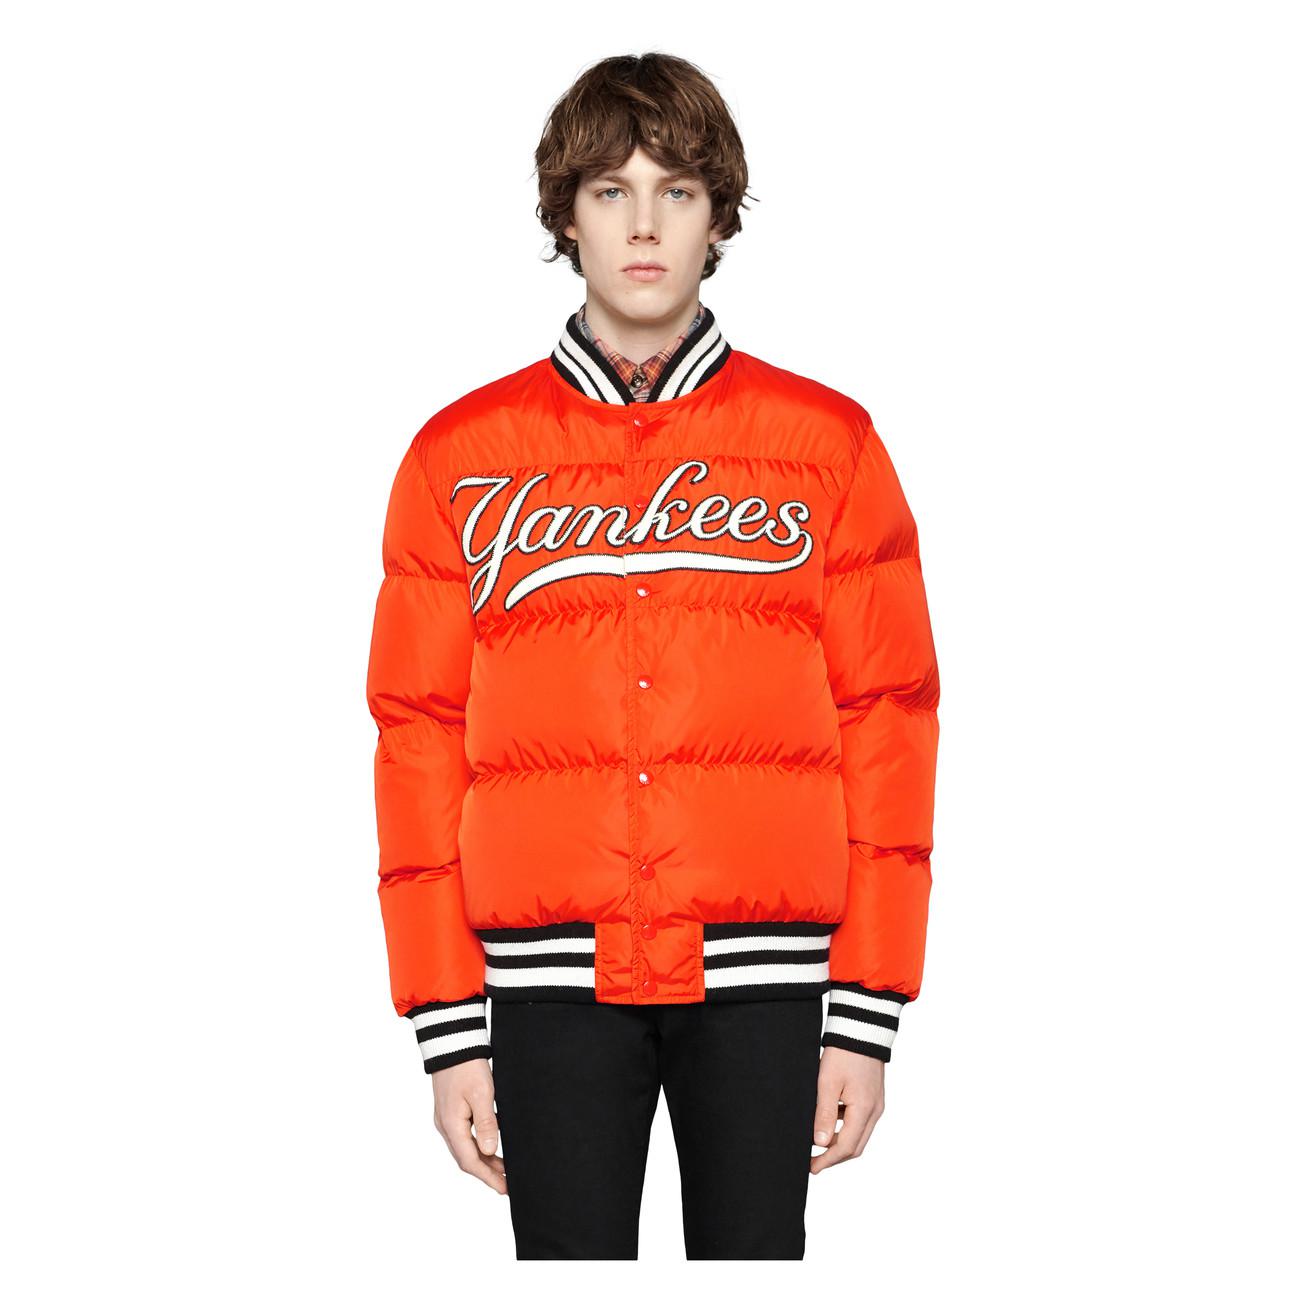 Gucci Men's Bomber Jacket With Ny Yankeestm Patch in Orange for Men - Lyst